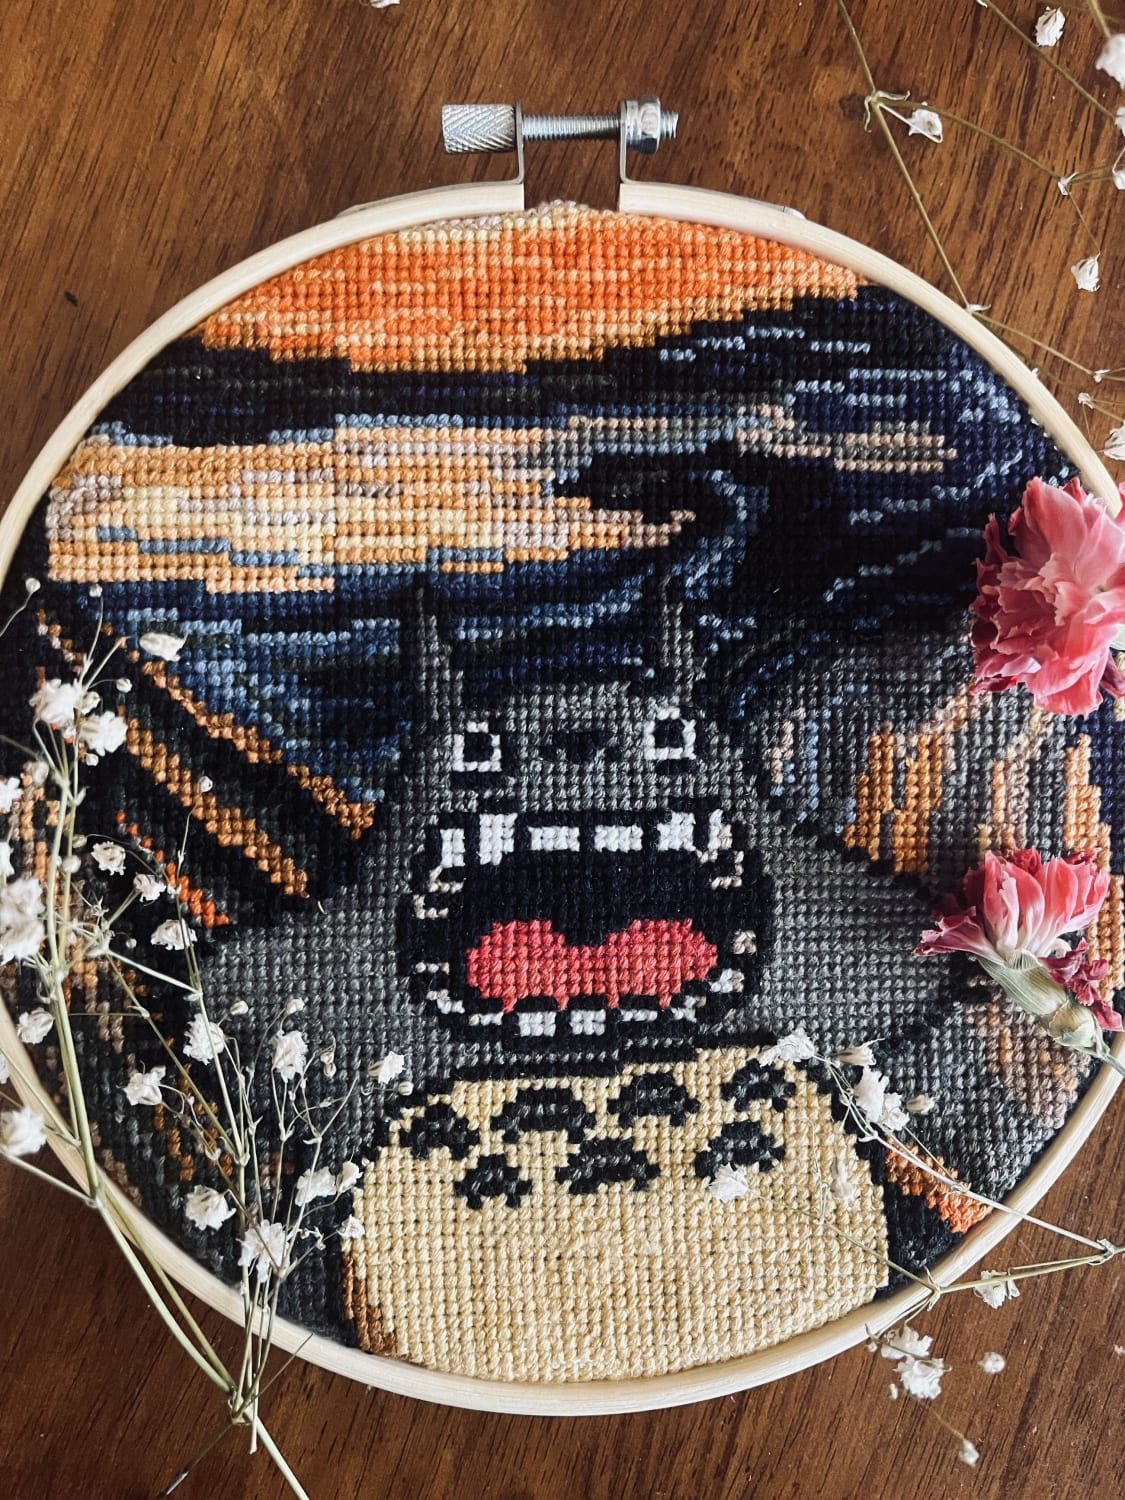 [FO] while struggling to balance a full time job and part time school, I’m super proud and happy how this project turned out!